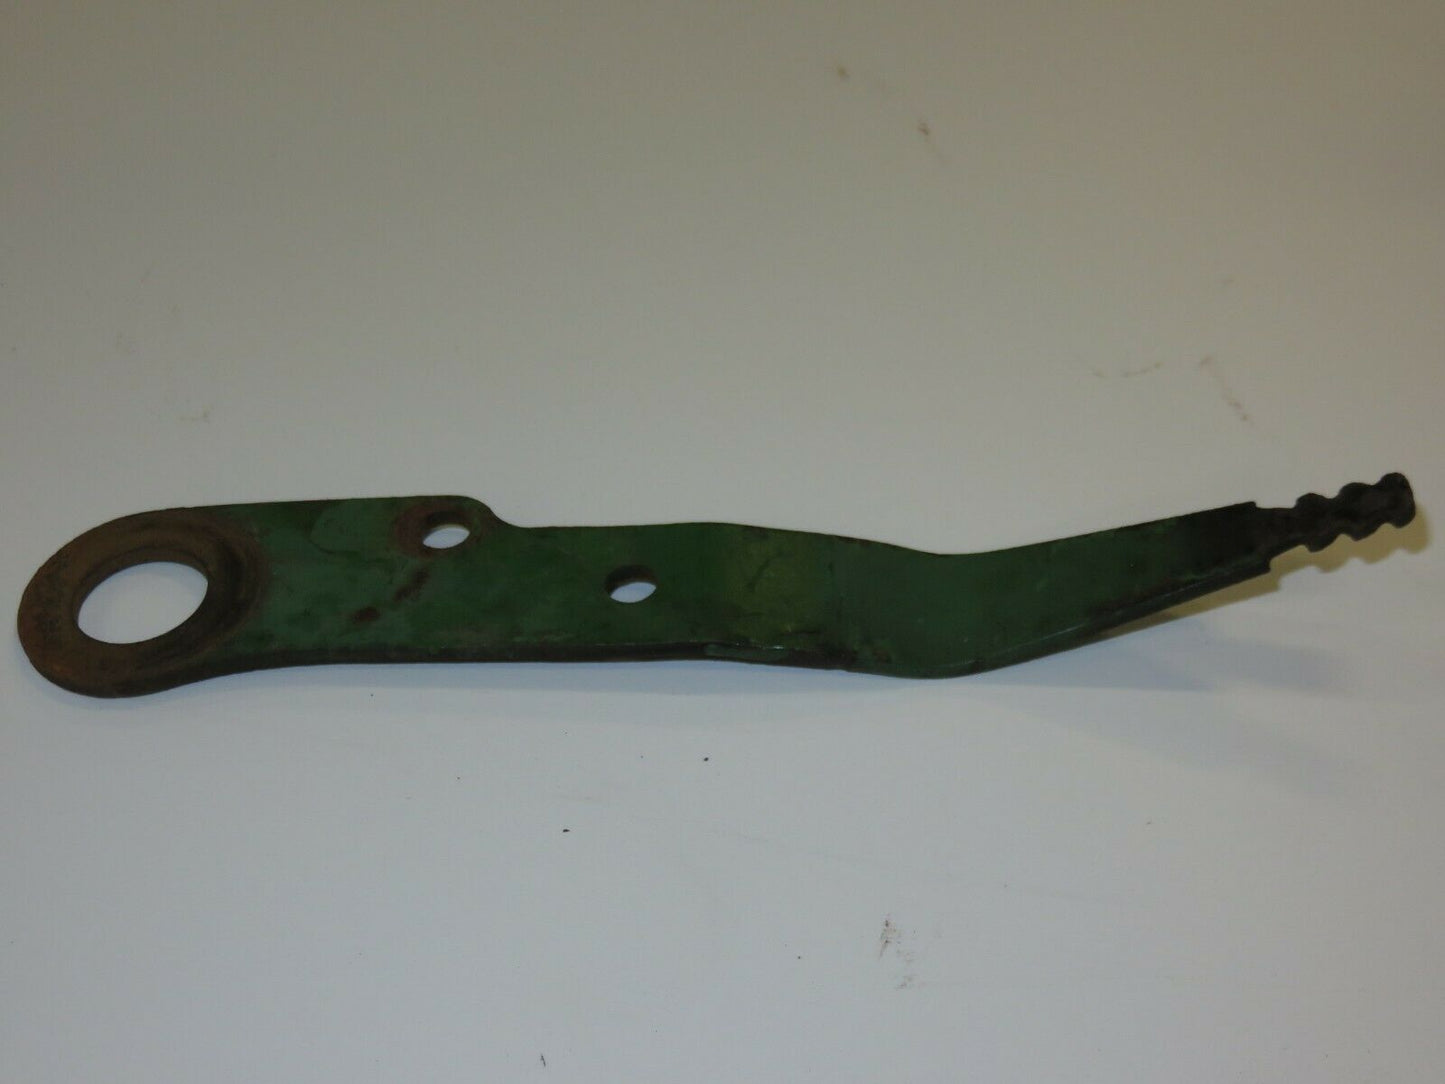 R28308 John Deere Selective Control Lever For Utility And Orchard 3010, 3020